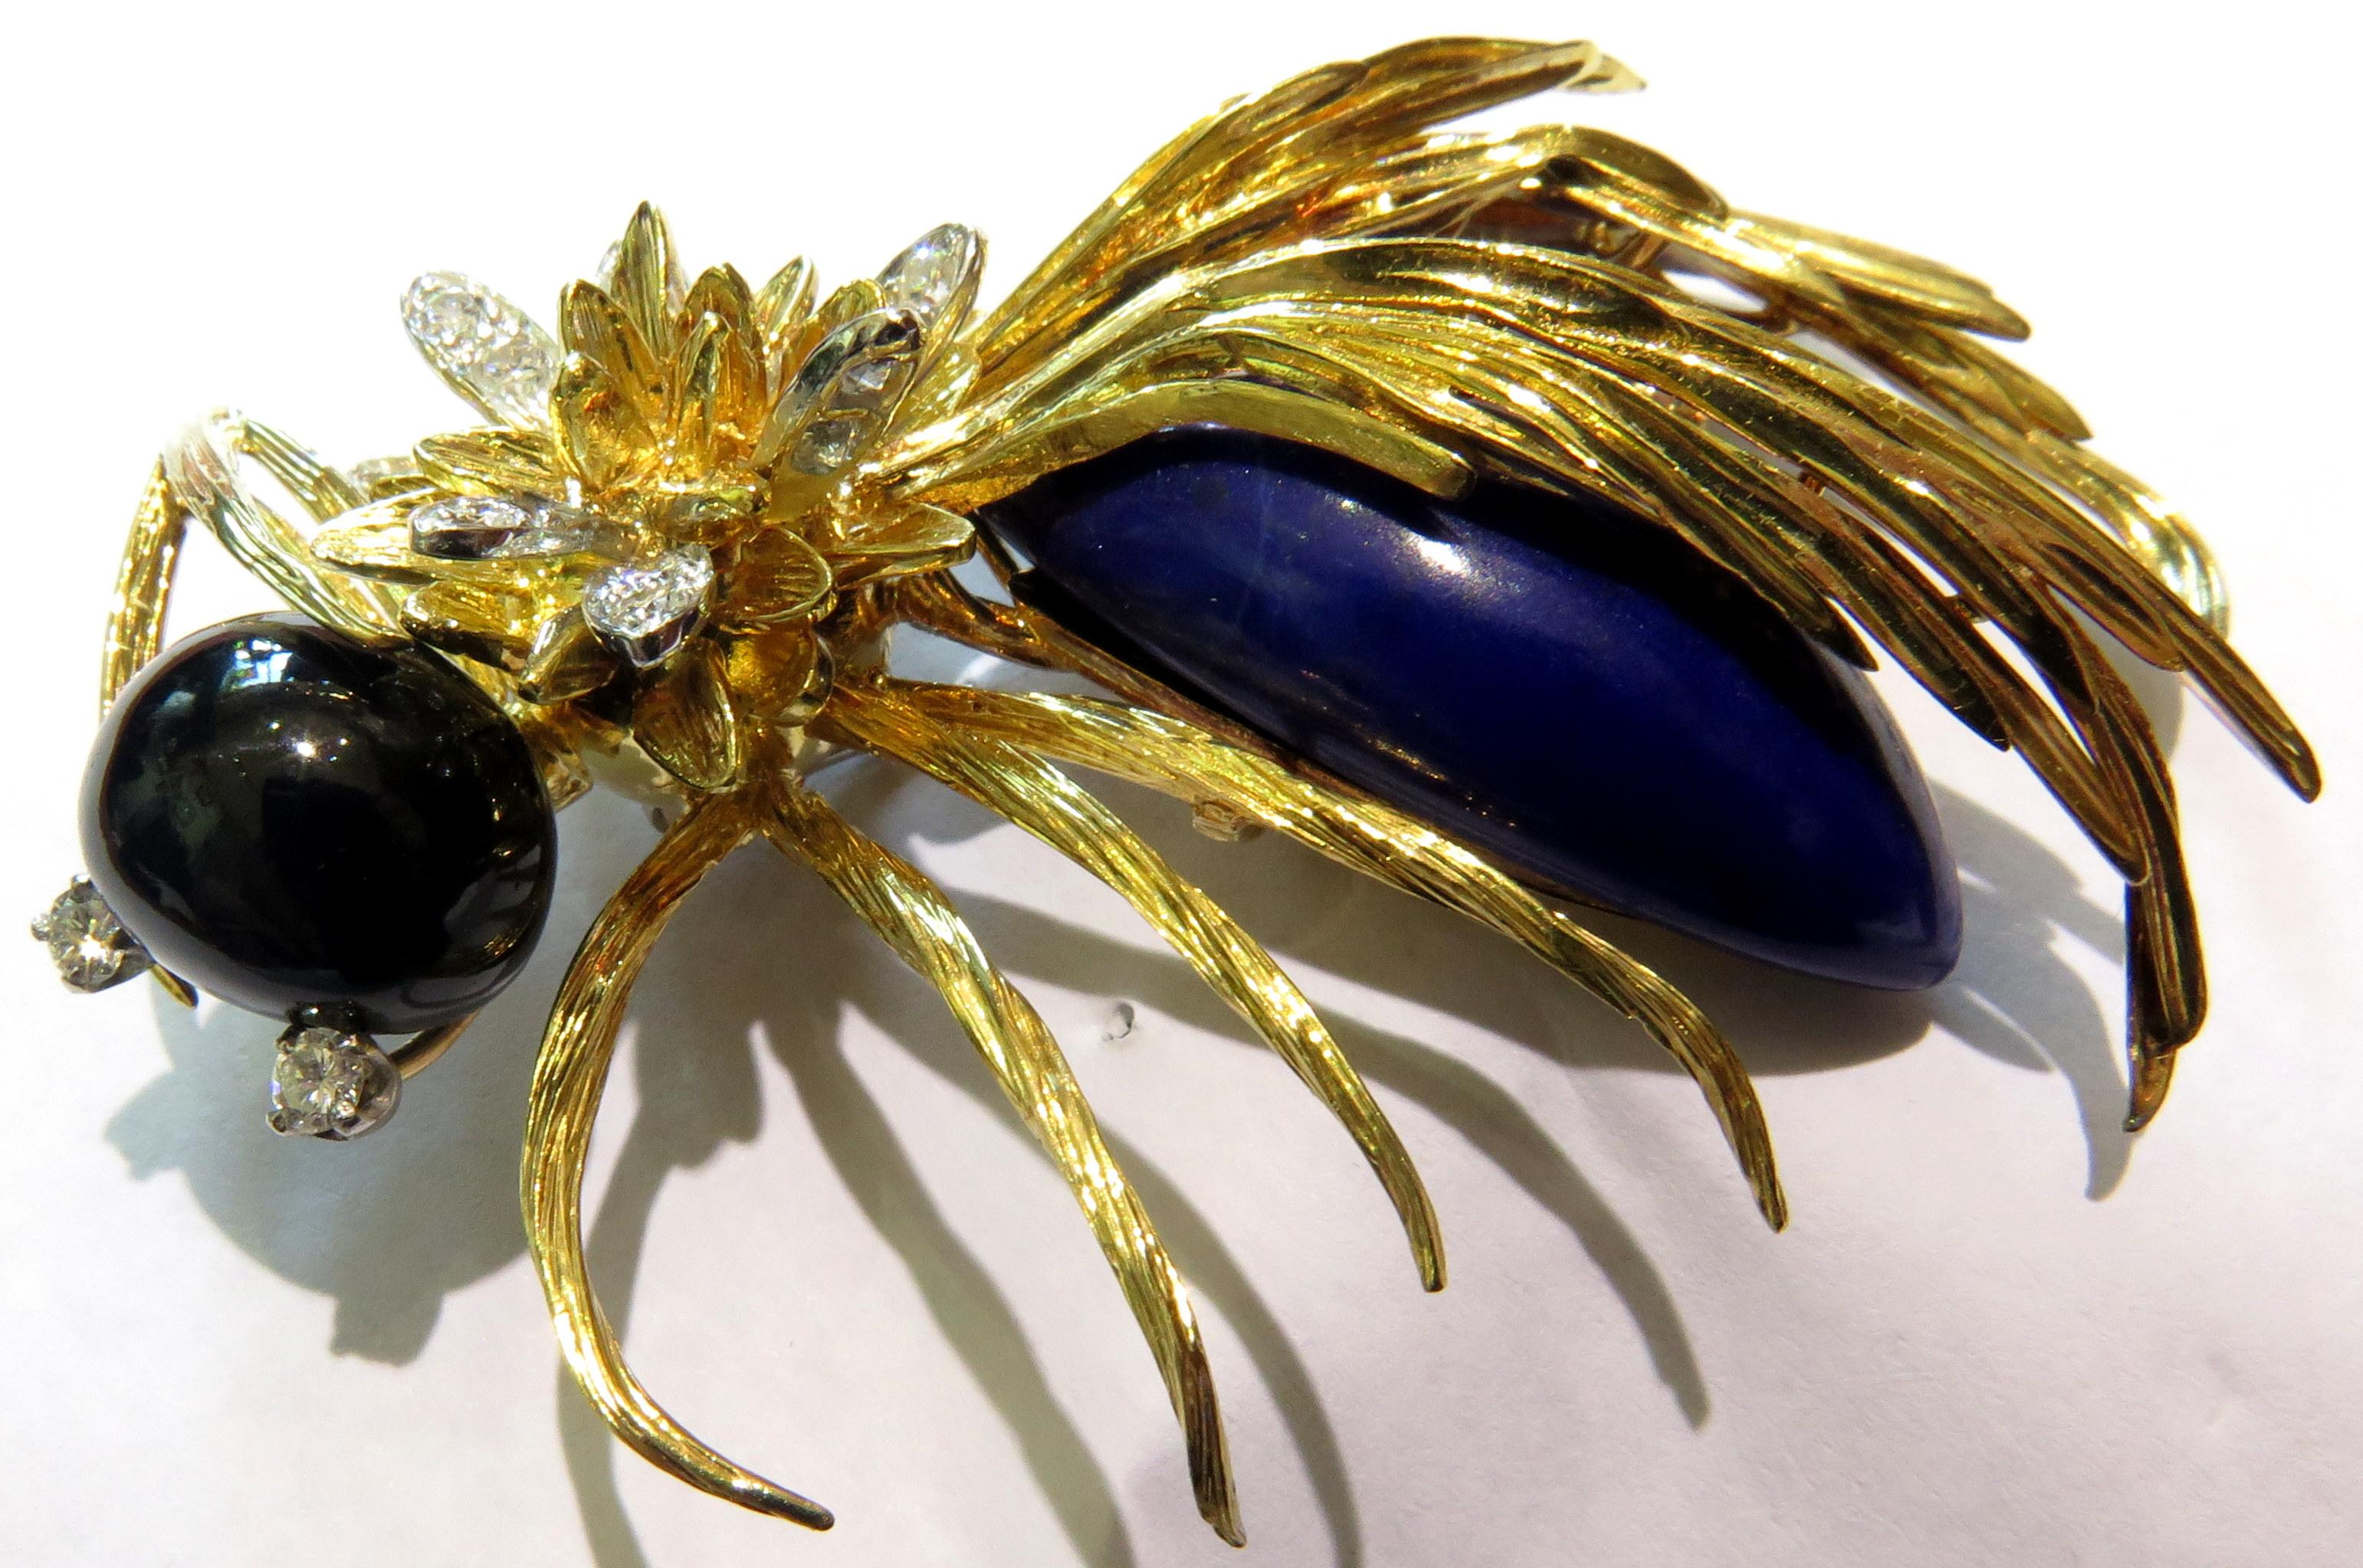 Huge Hammerman Brothers Platinum Gold Wasp Pin Brooch With Diamonds Lapis & Onyx For Sale 1